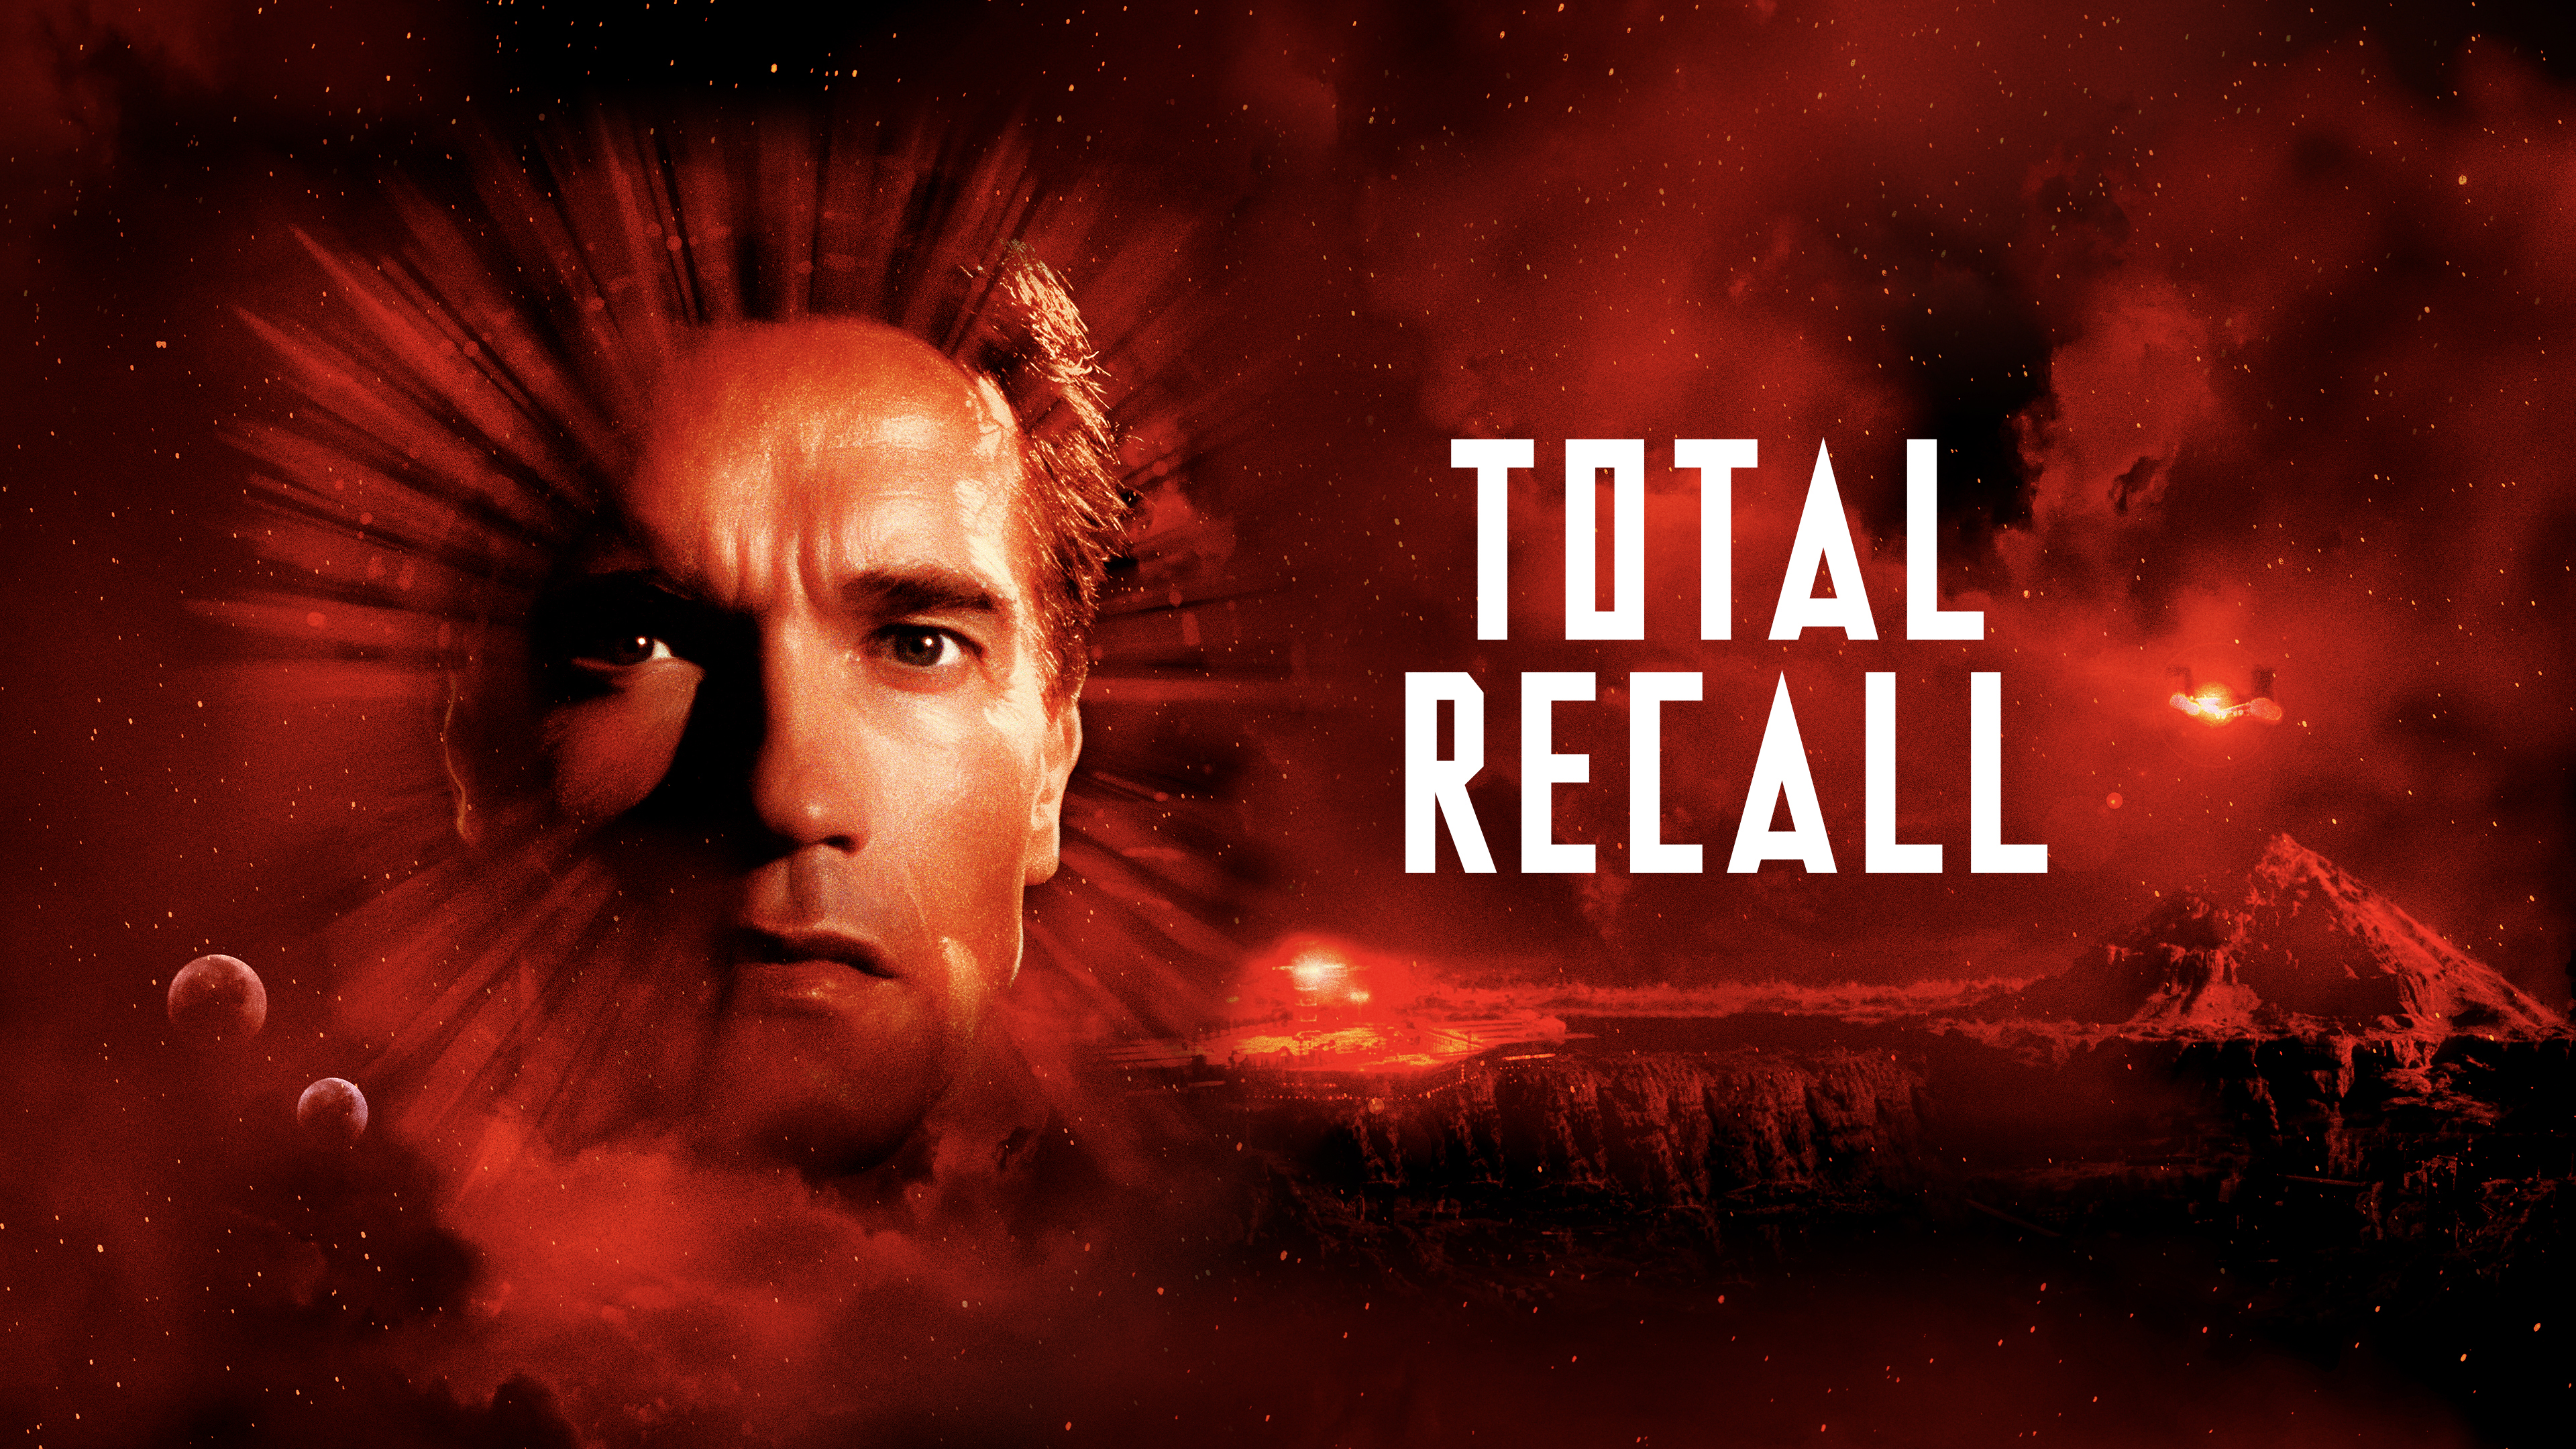 total recall 1990 movie poster